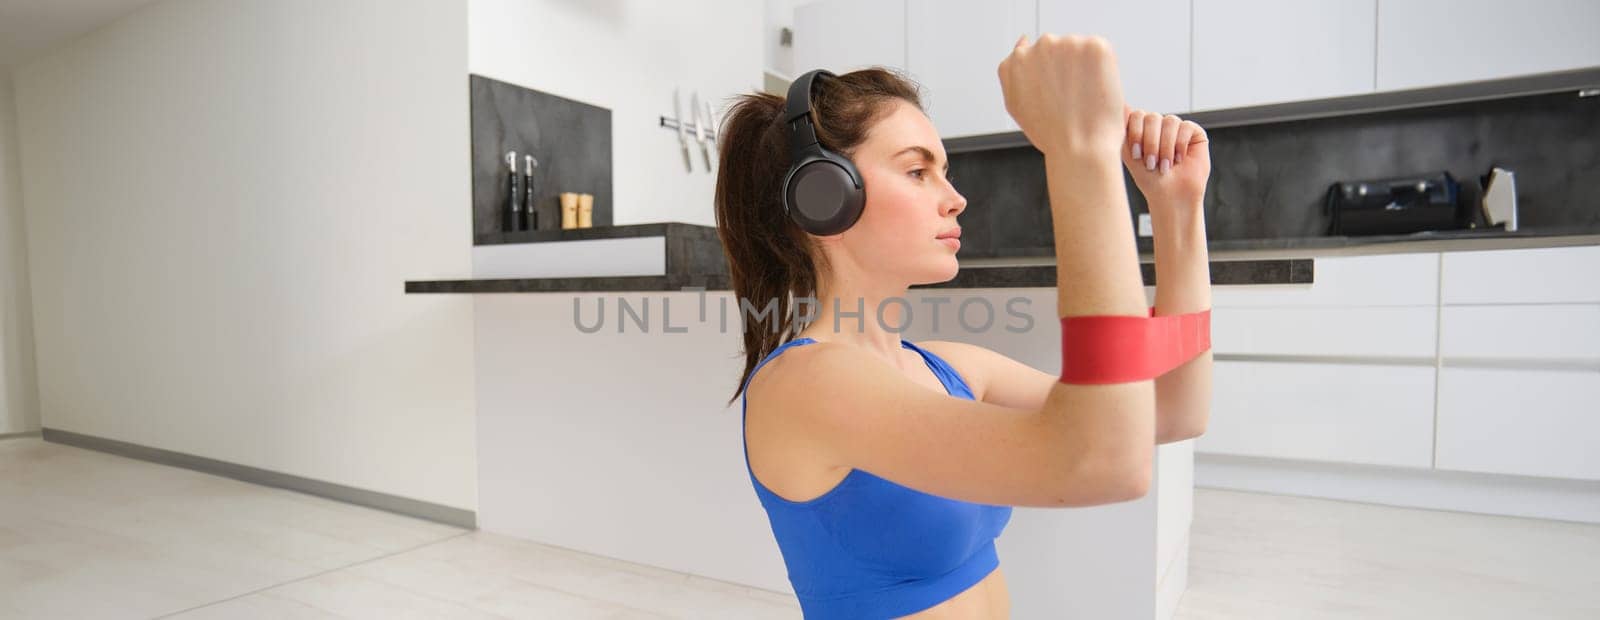 Focused sportswoman workout at home, using elastic resistance band on arms, stretching exercises in living room, aerobics training.